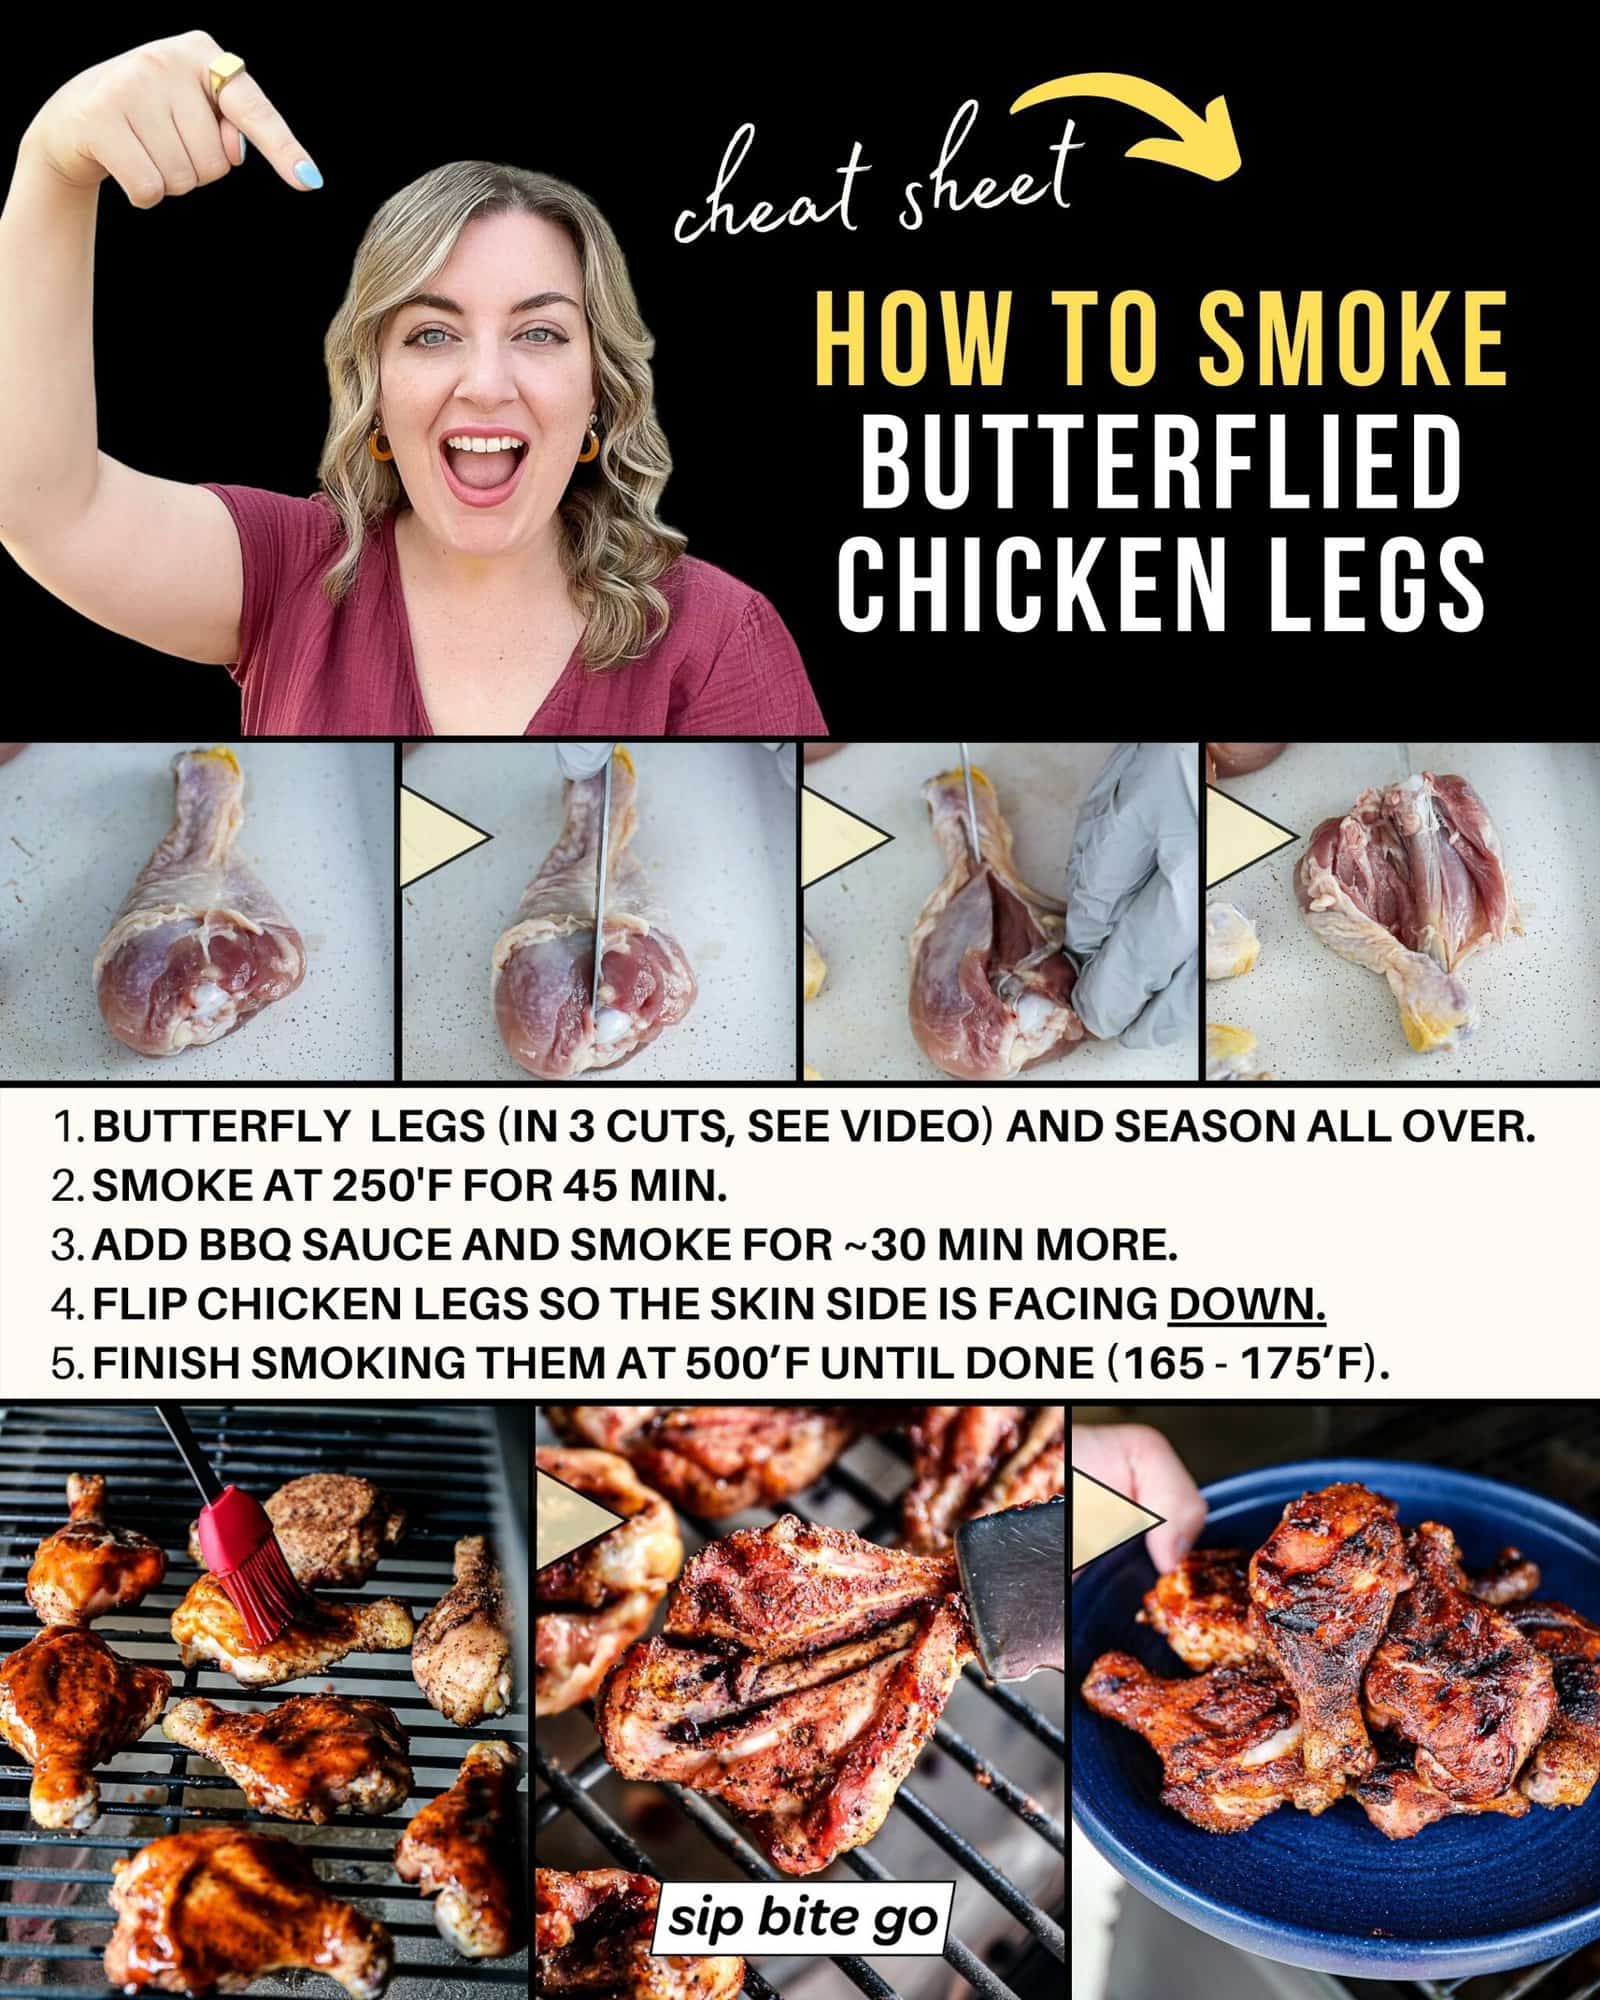 Infographic demonstrating how to butterfly chicken legs and smoke them in the Traeger pellet grill with Jenna Passaro food blogger of Sip Bite Go